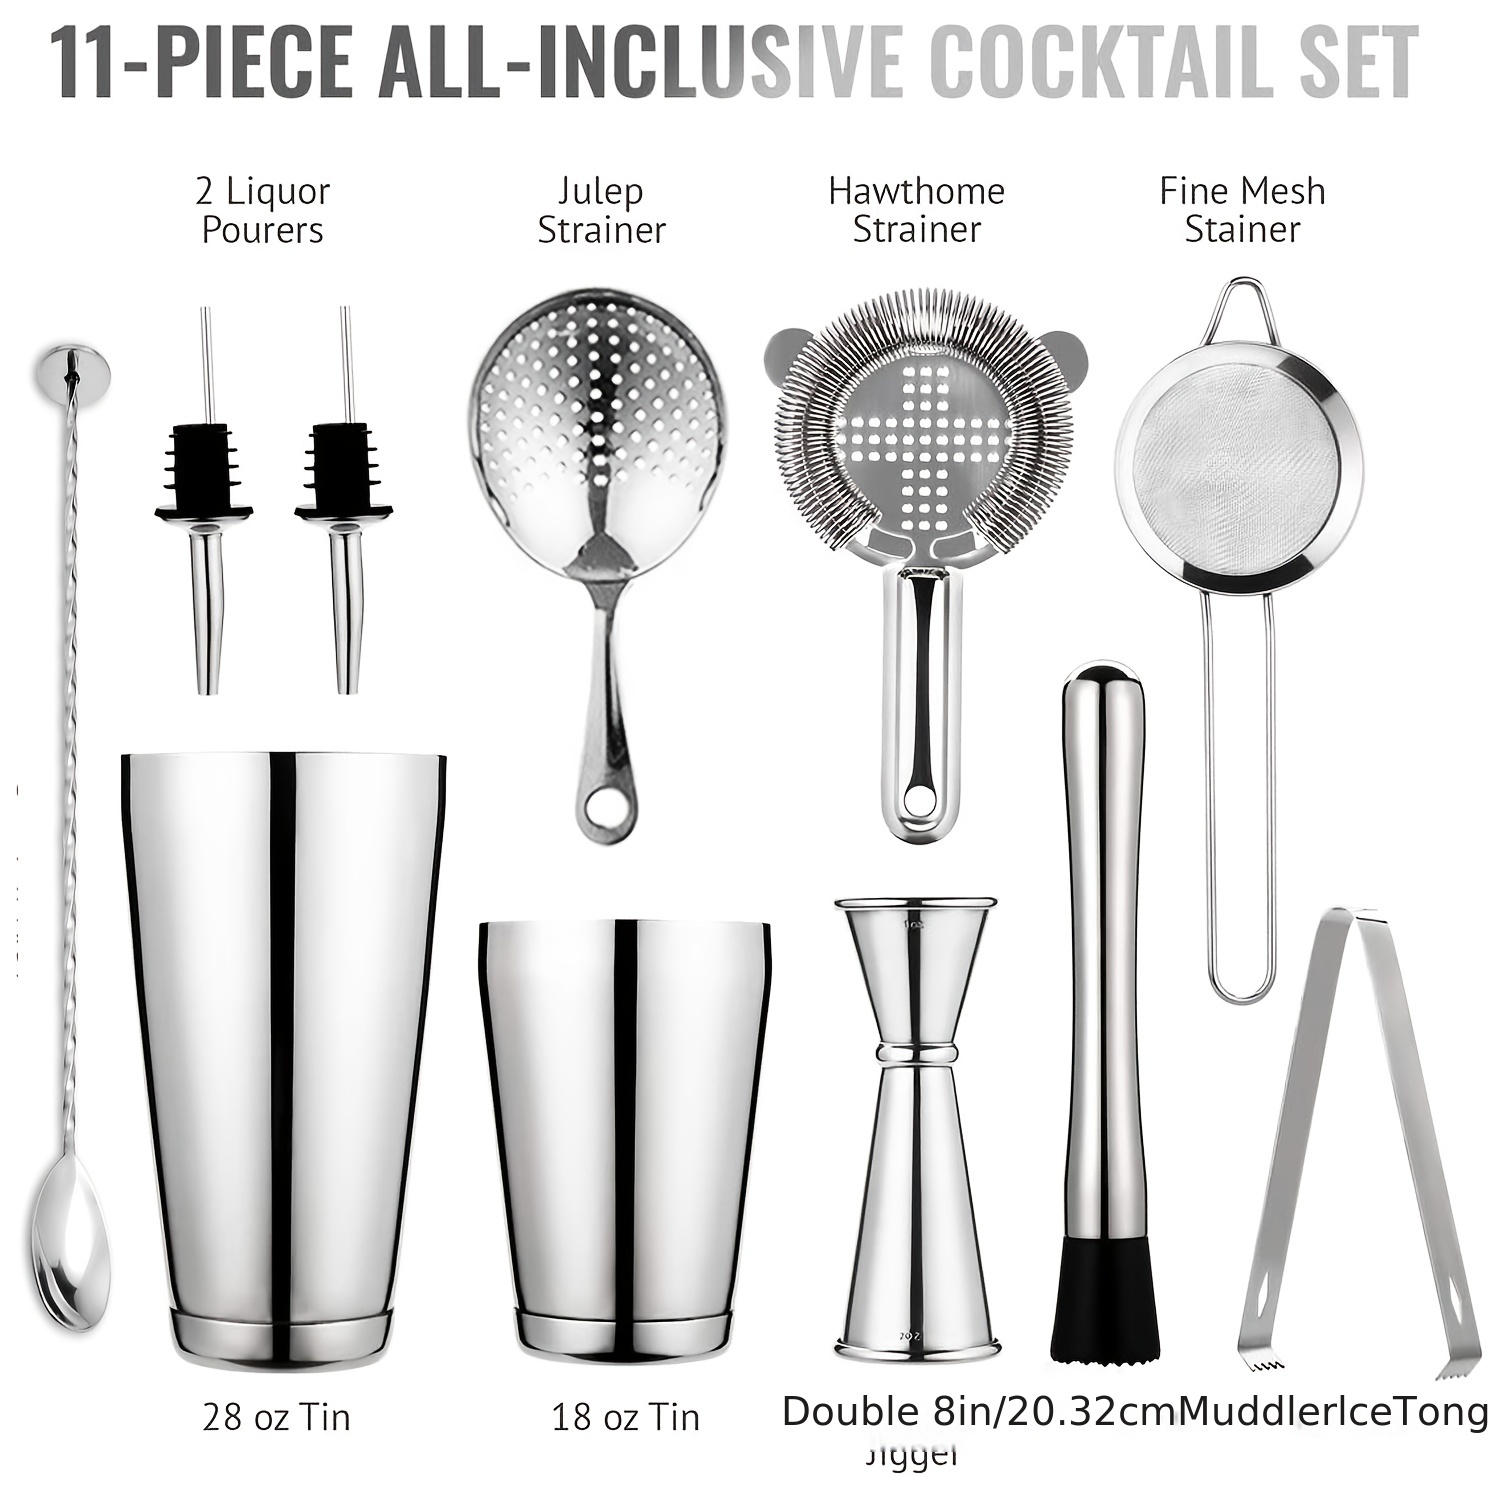 Cocktail Shaker Bar Set: 2 Weighted Boston Shakers, Cocktail Strainer  Set,Jigger,Muddler and Spoon, Ice Tong and 6 Bottle Pourer